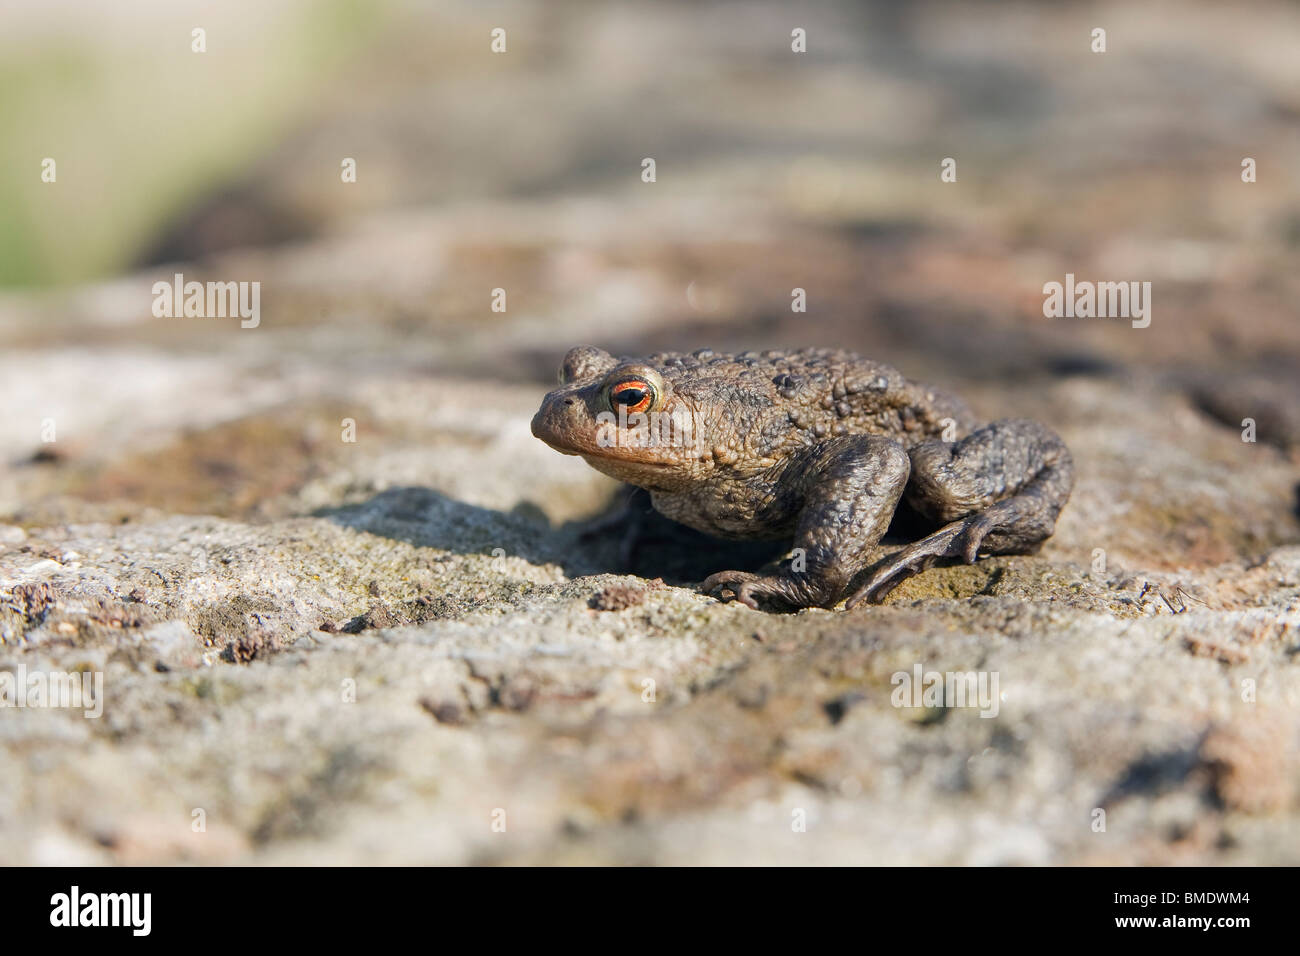 A common toad (bufo bufo) sitting on a rock in the English countryside Stock Photo